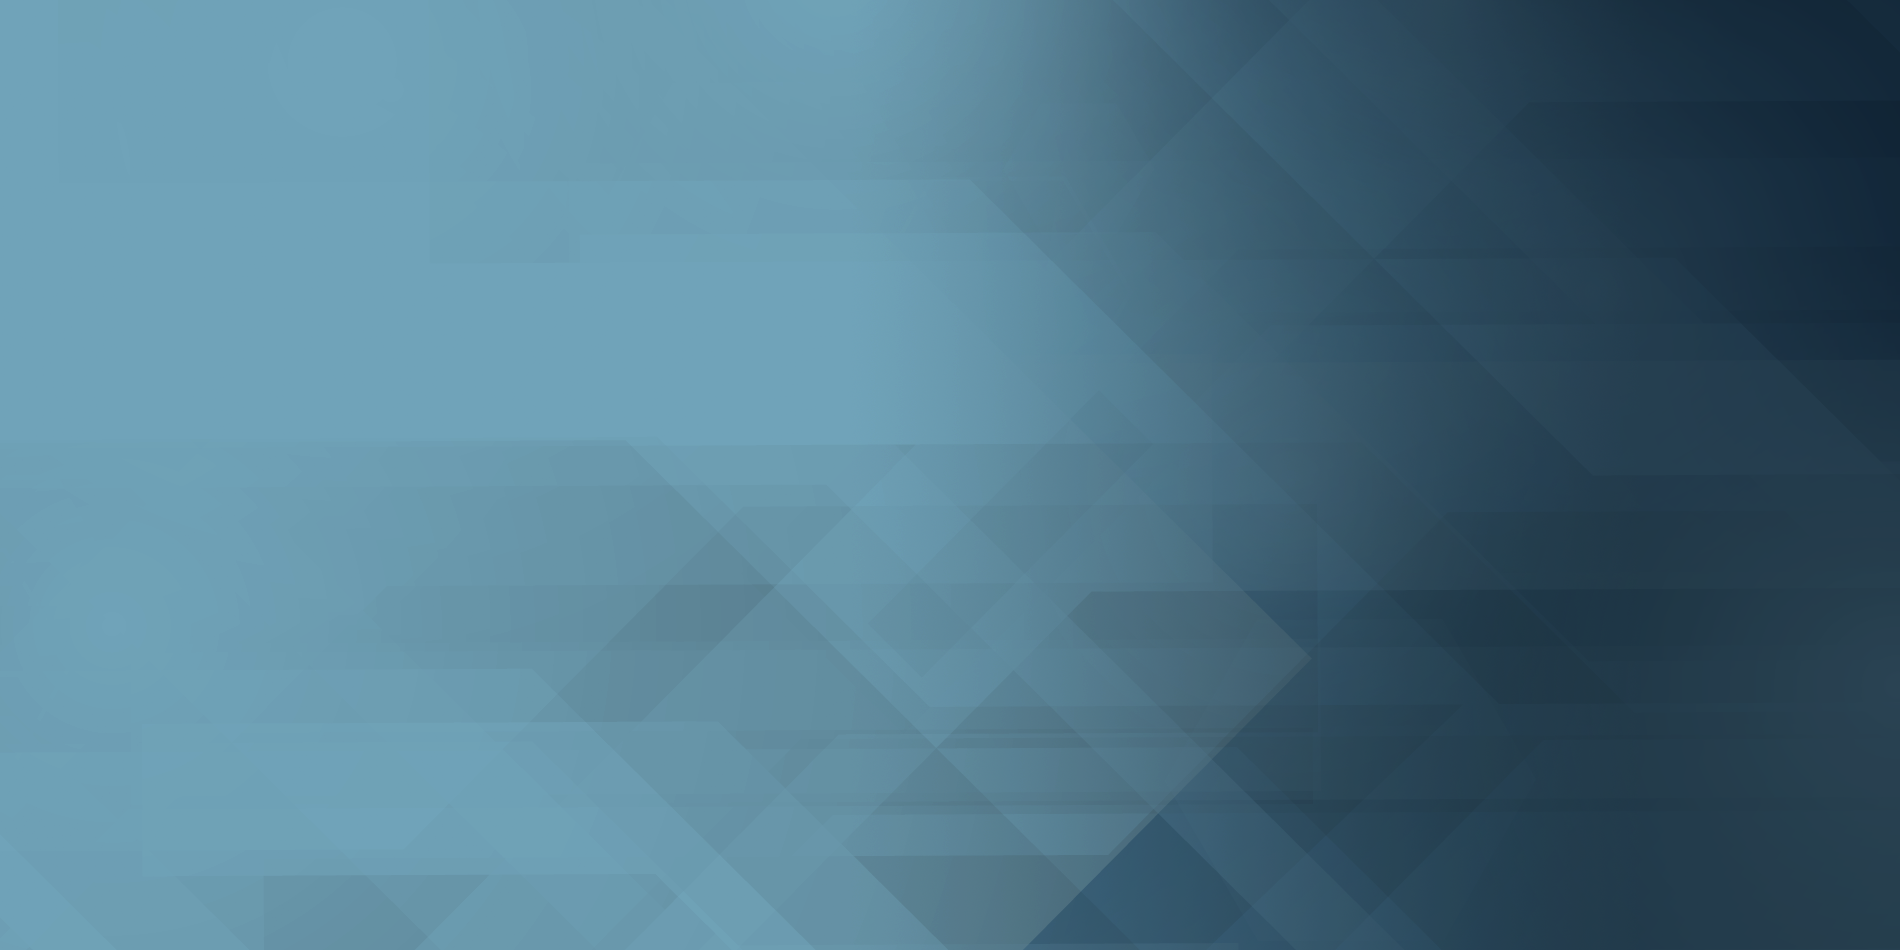 Blue abstract background banner image.